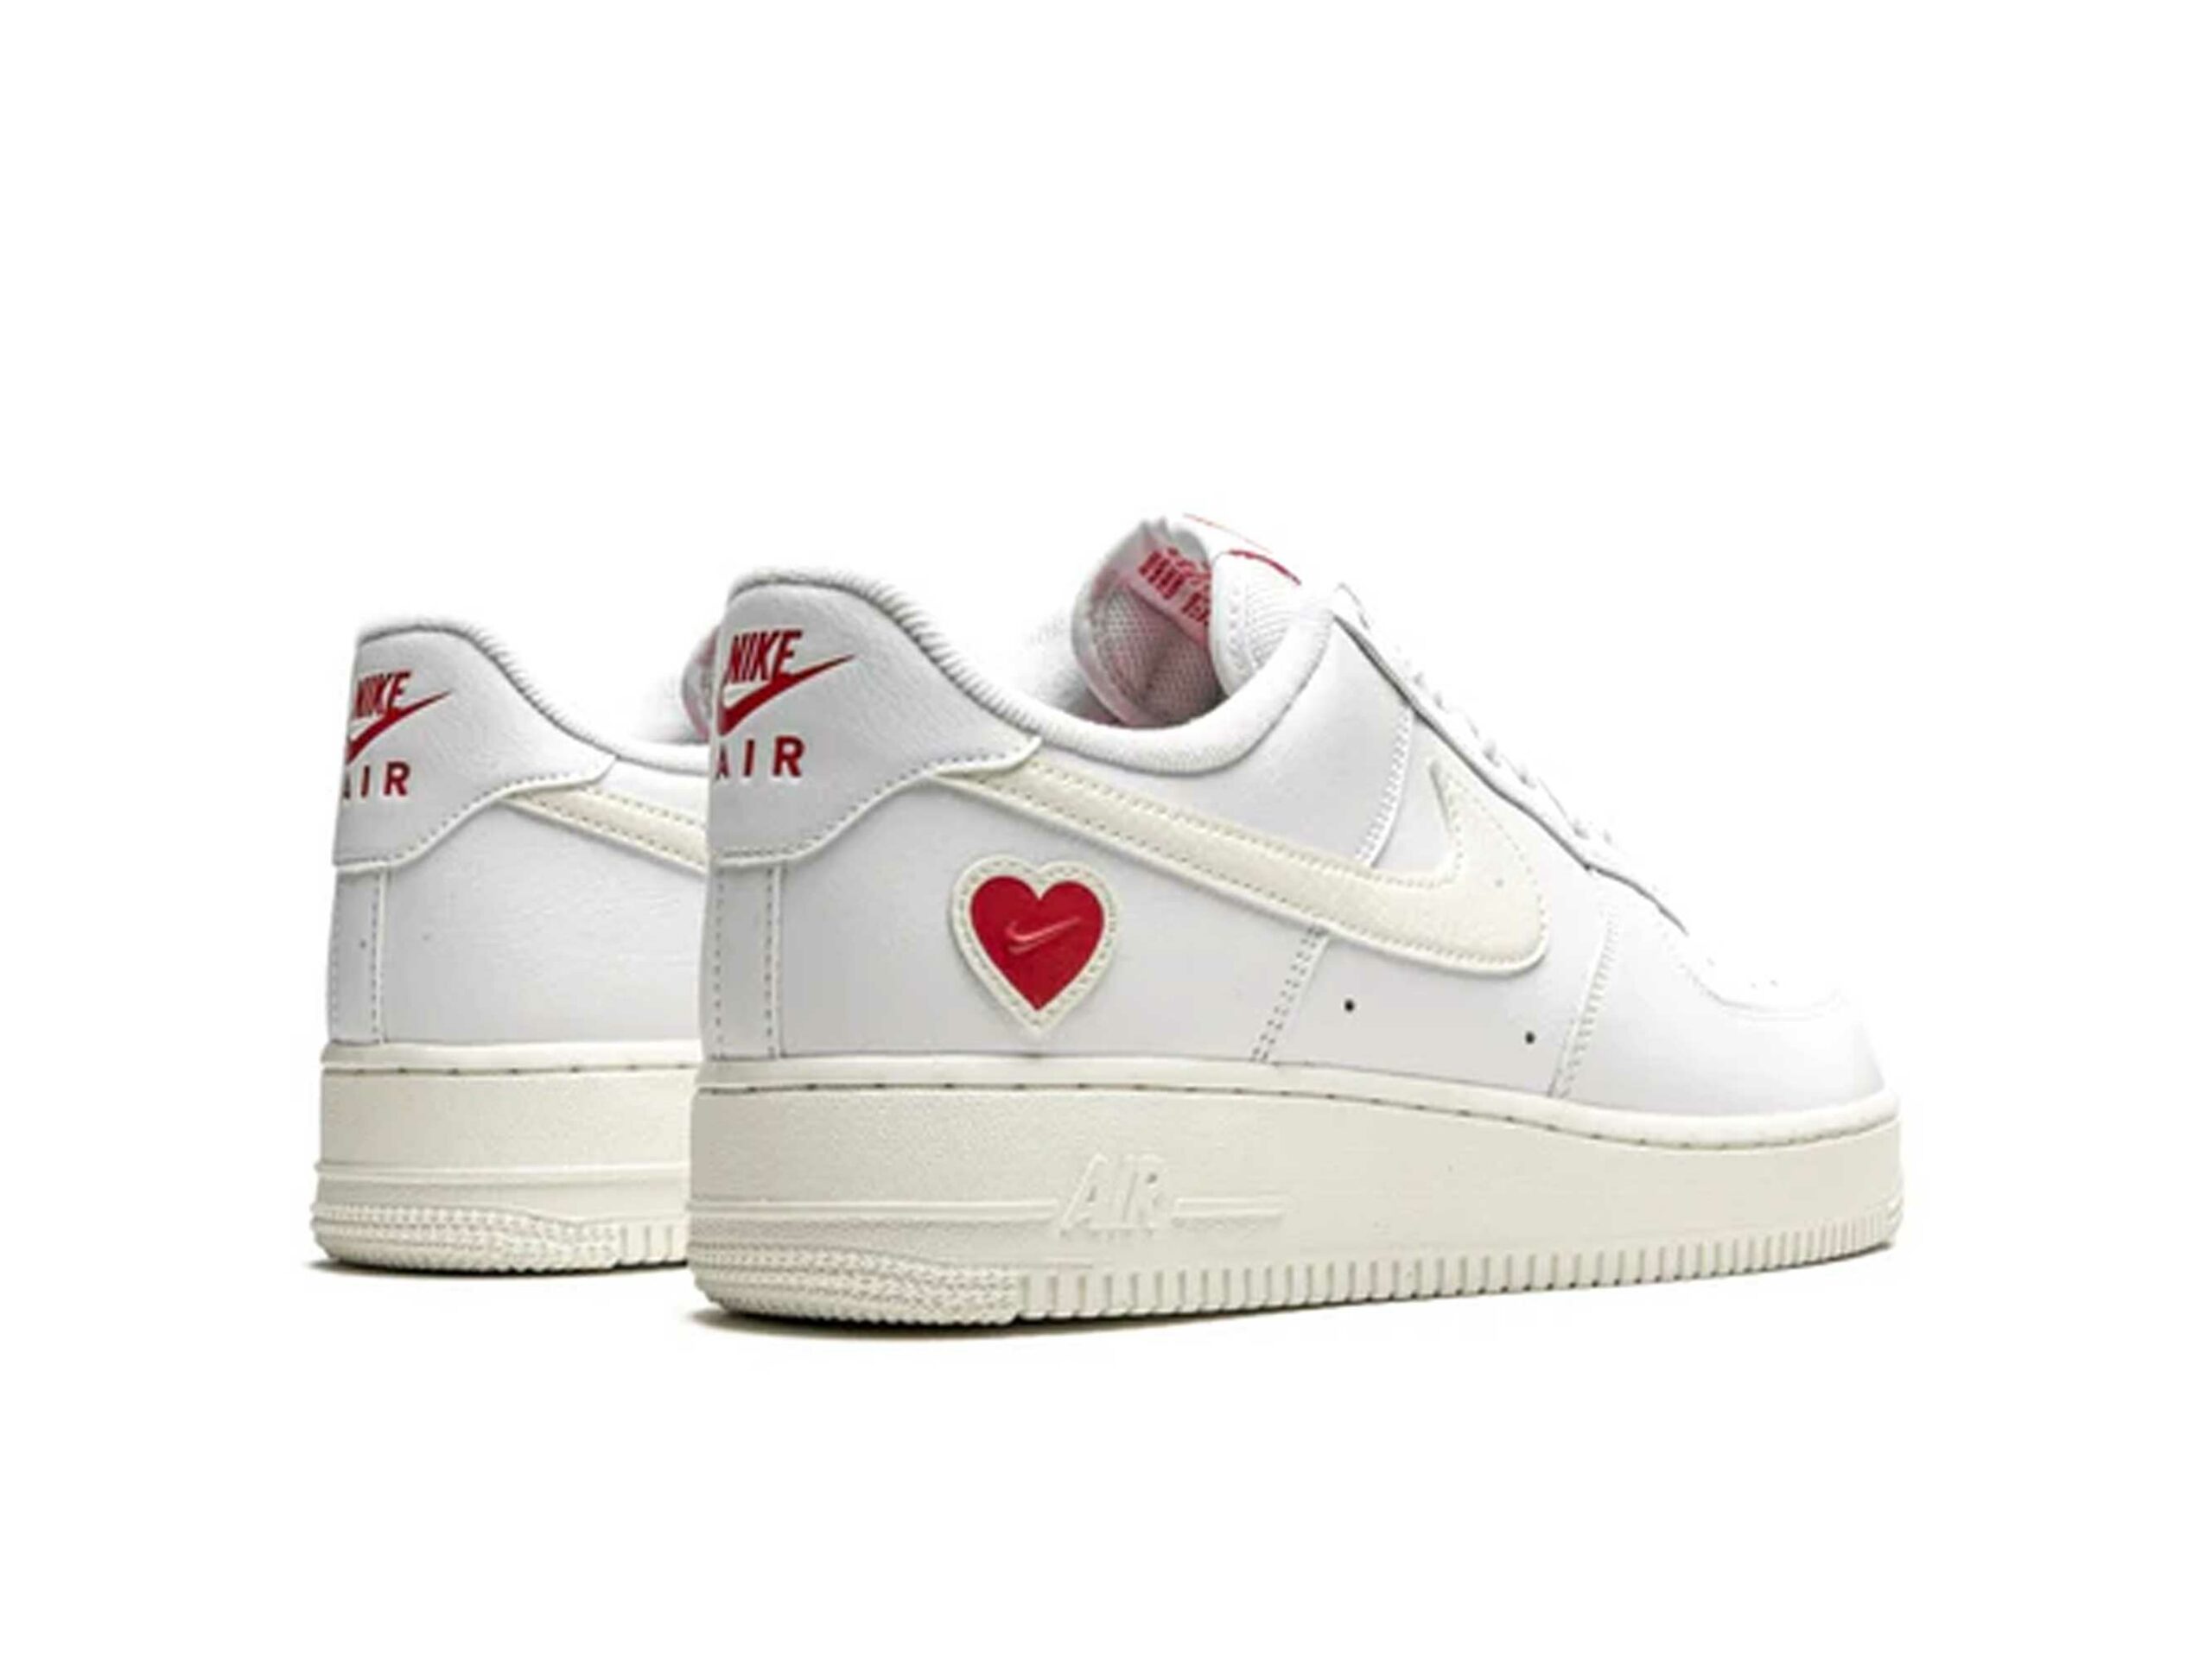 Air force valentines day. Nike Air Force 1 Low Valentines Day 2021. Nike Air Force 1 Low “Valentine’s Day” 2023. Nike Air Force 1 Valentines Day 2021. Nike Air Force 1’07 “Valentines Day” (2021).